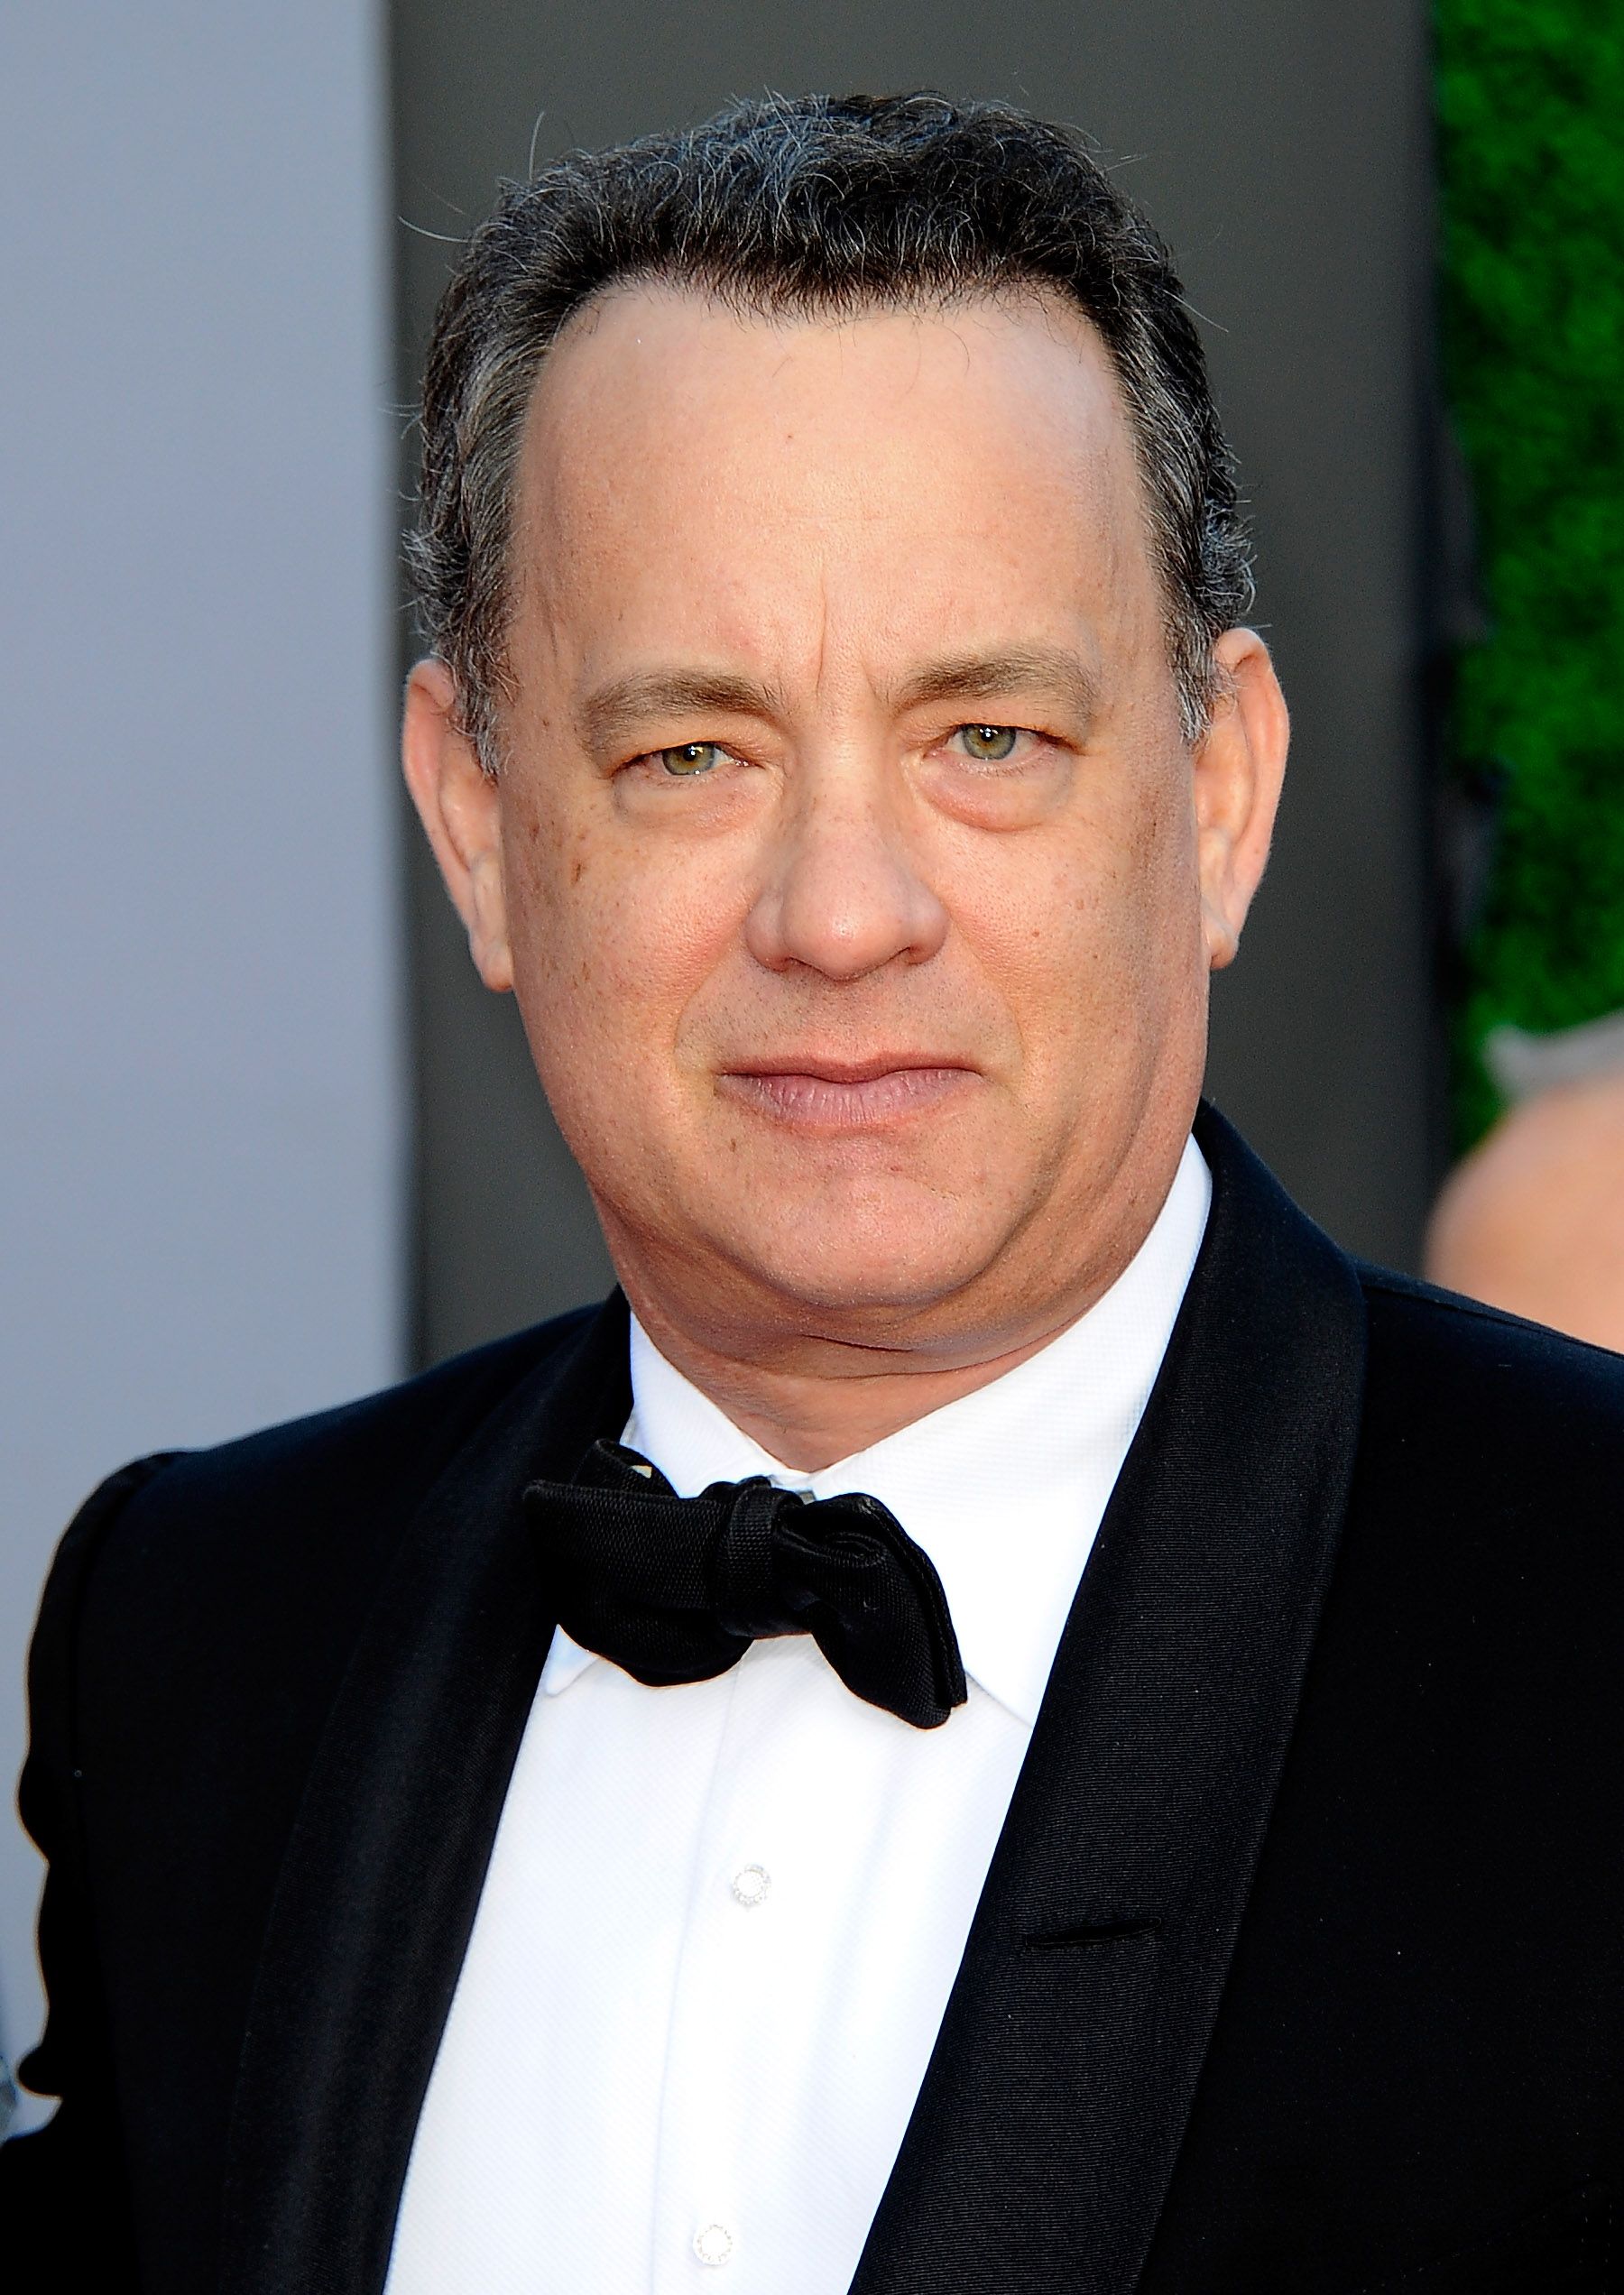  Tom Hanks at at the BAFTA Brits in L.A  on July 9, 2011 | Photo: Getty Images